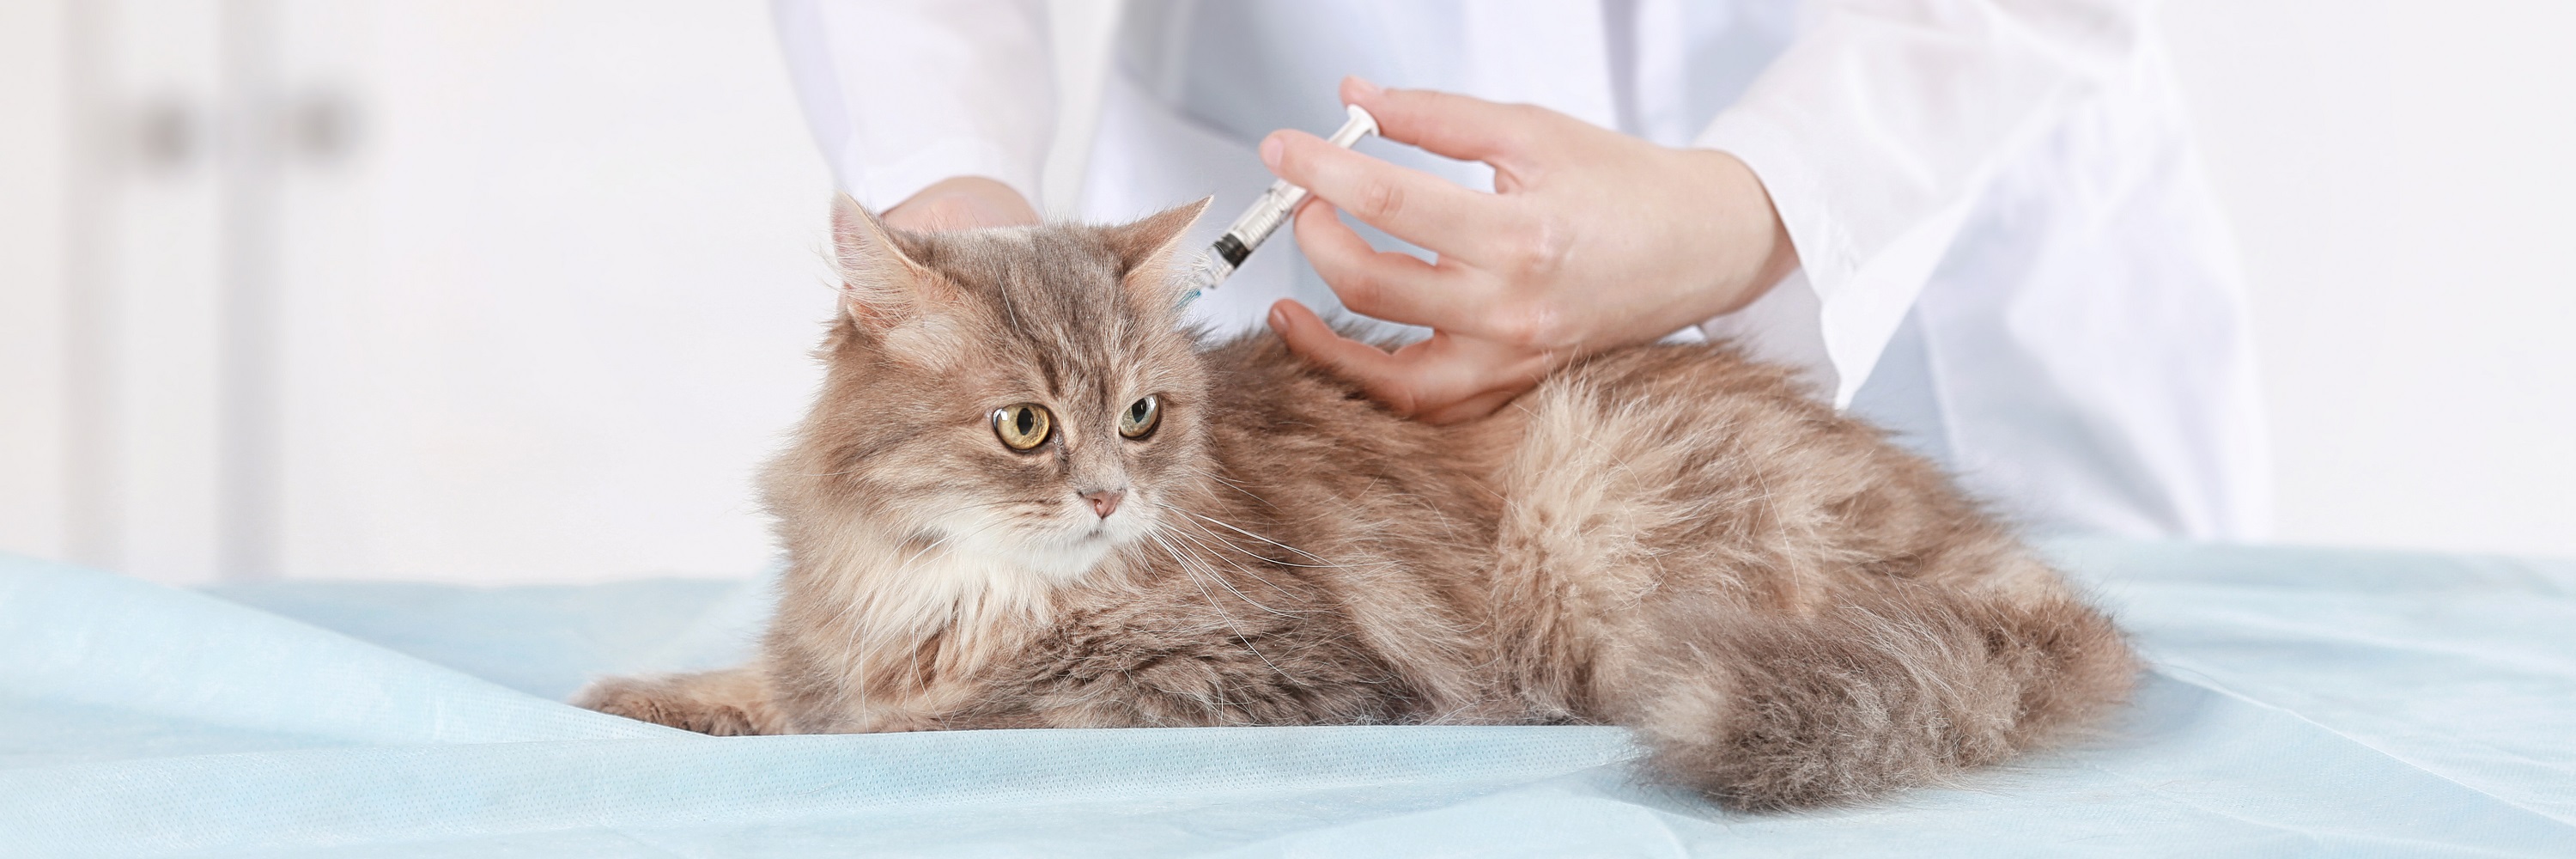 my cat is sick after vaccination